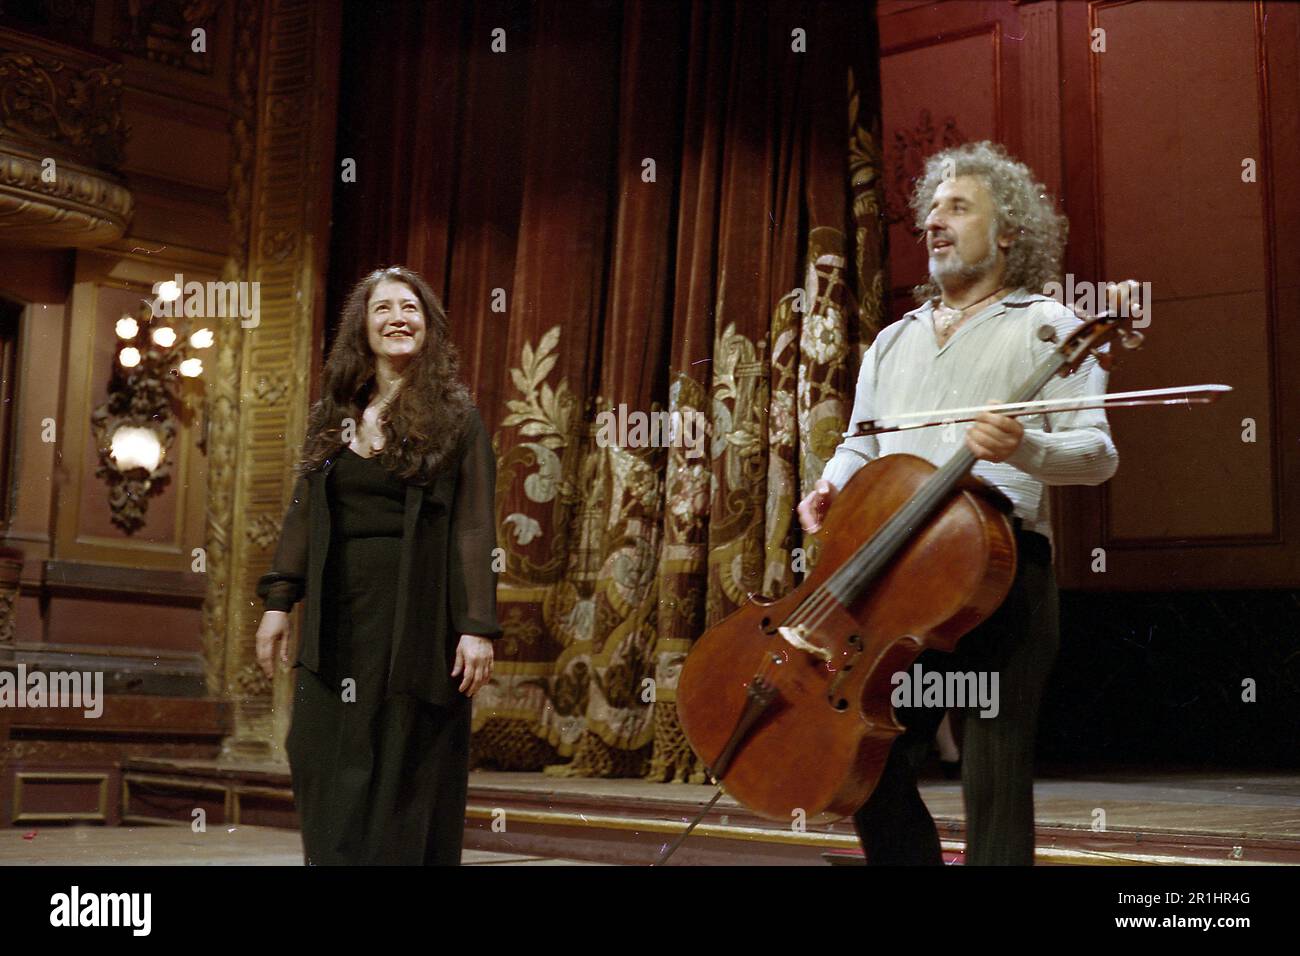 Martha Argerich, Argentine pianist and Mischa Maisky, Russian cellist, after a performance at the Teatro Colon, Buenos Aires, Argentina, circa 2000 Stock Photo